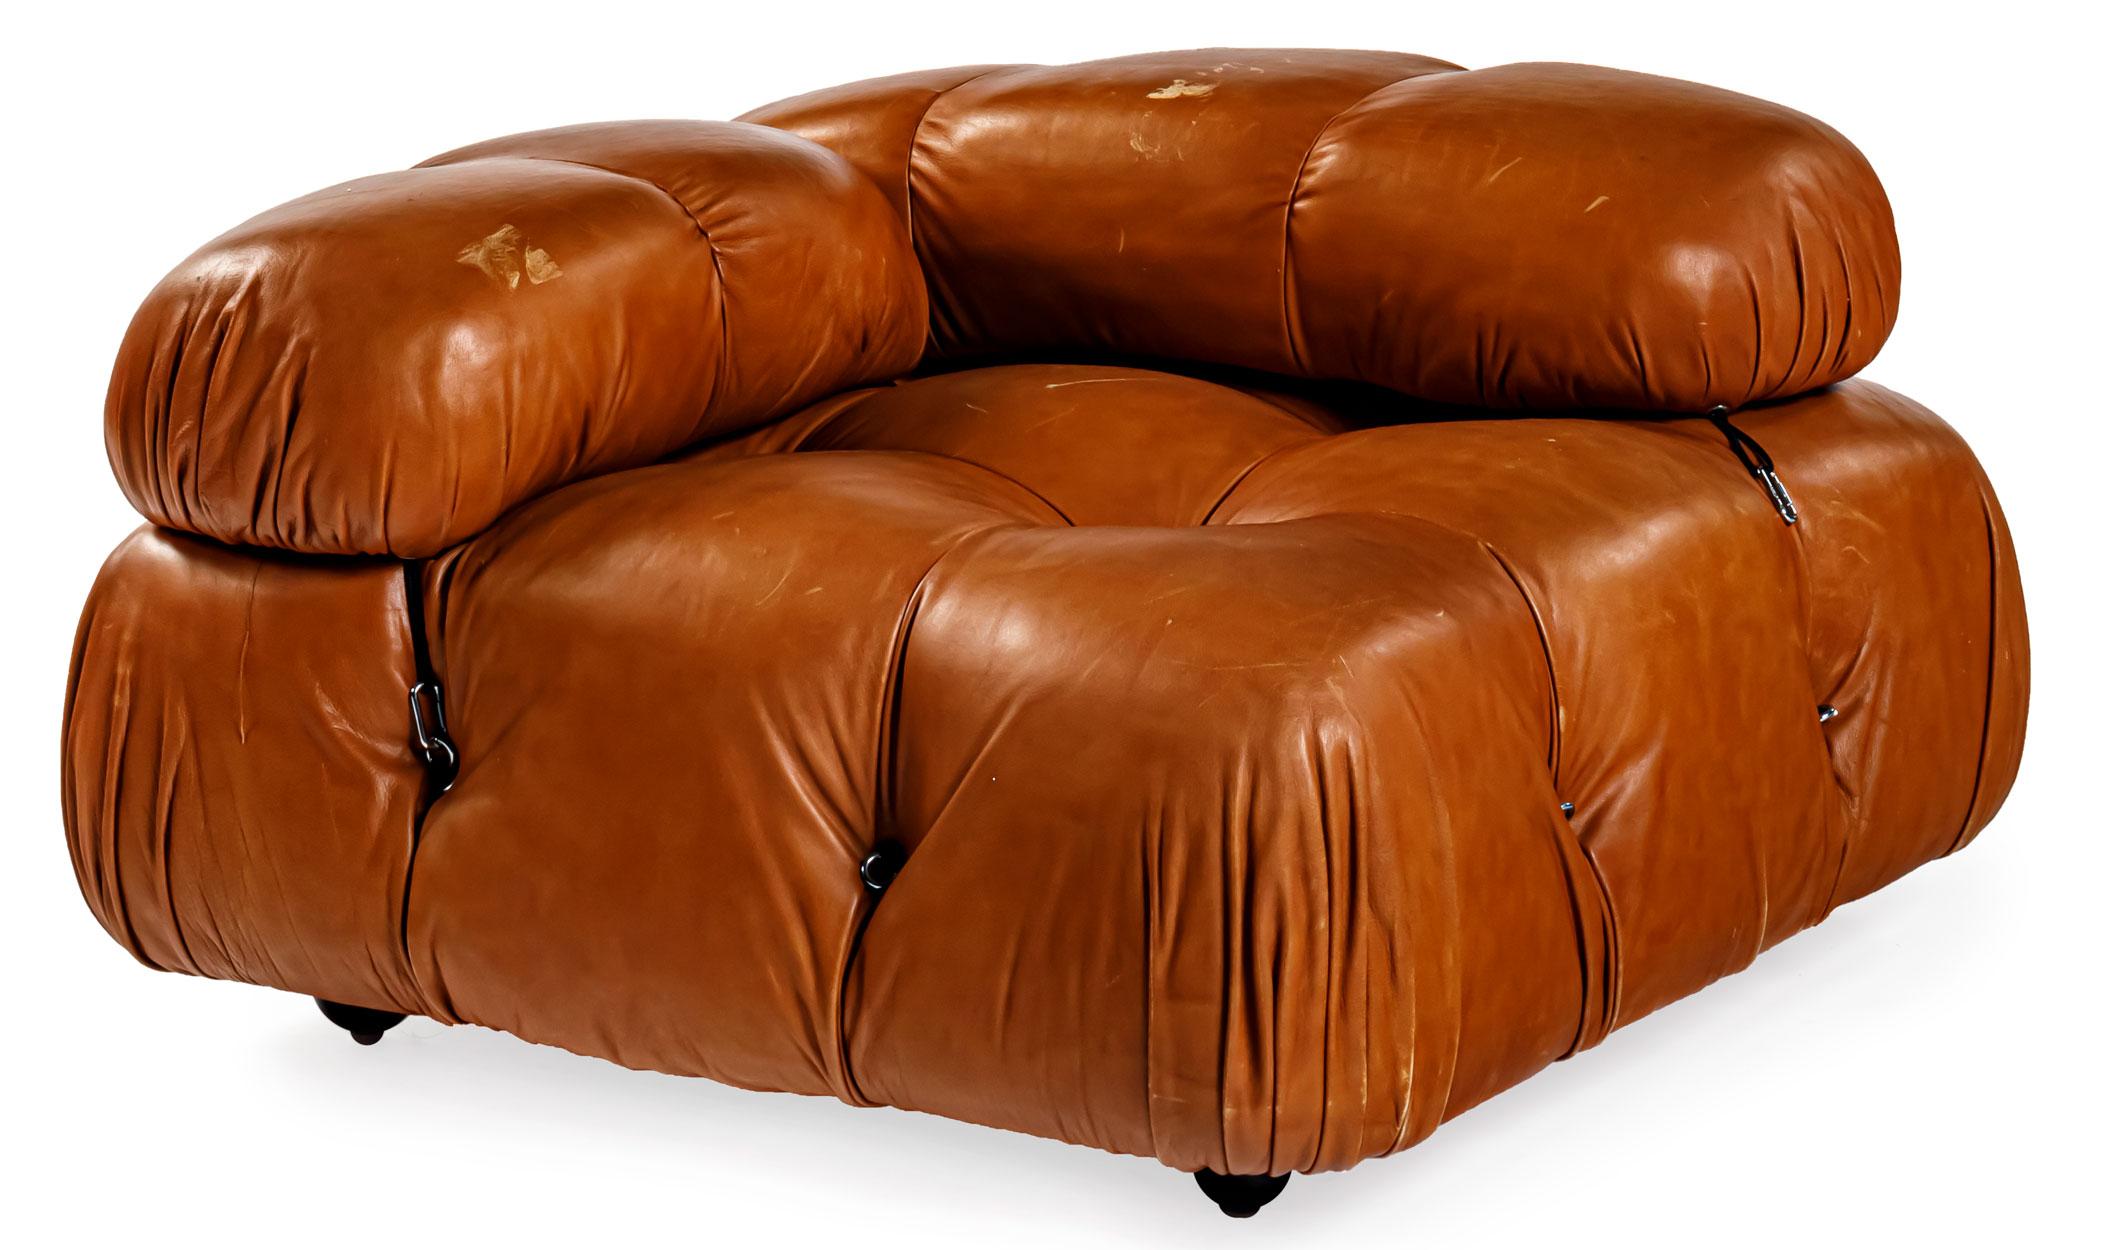 Vintage Camaleonda Sectional in cognac brown leather designed by Mario Bellini for B&B Italia -1971
The sofa remains in its original condition with visible wear consistent with age, no restorations have been made. Includes three modules.